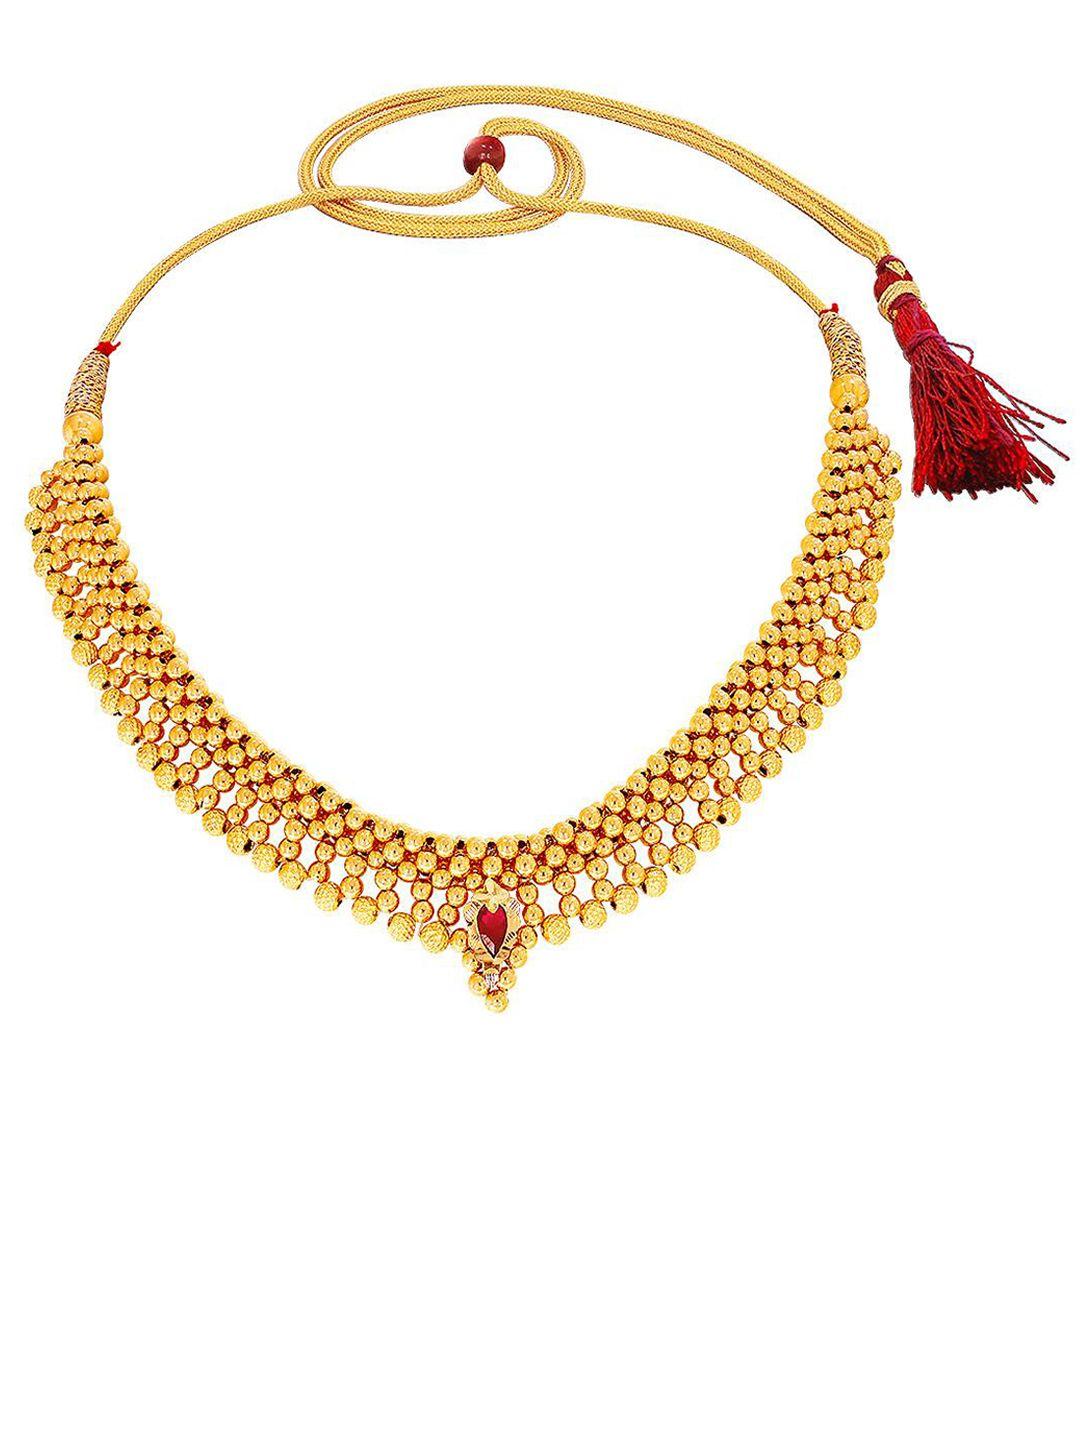 candere a kalyan jewellers company gold-plated 22kt choker necklace